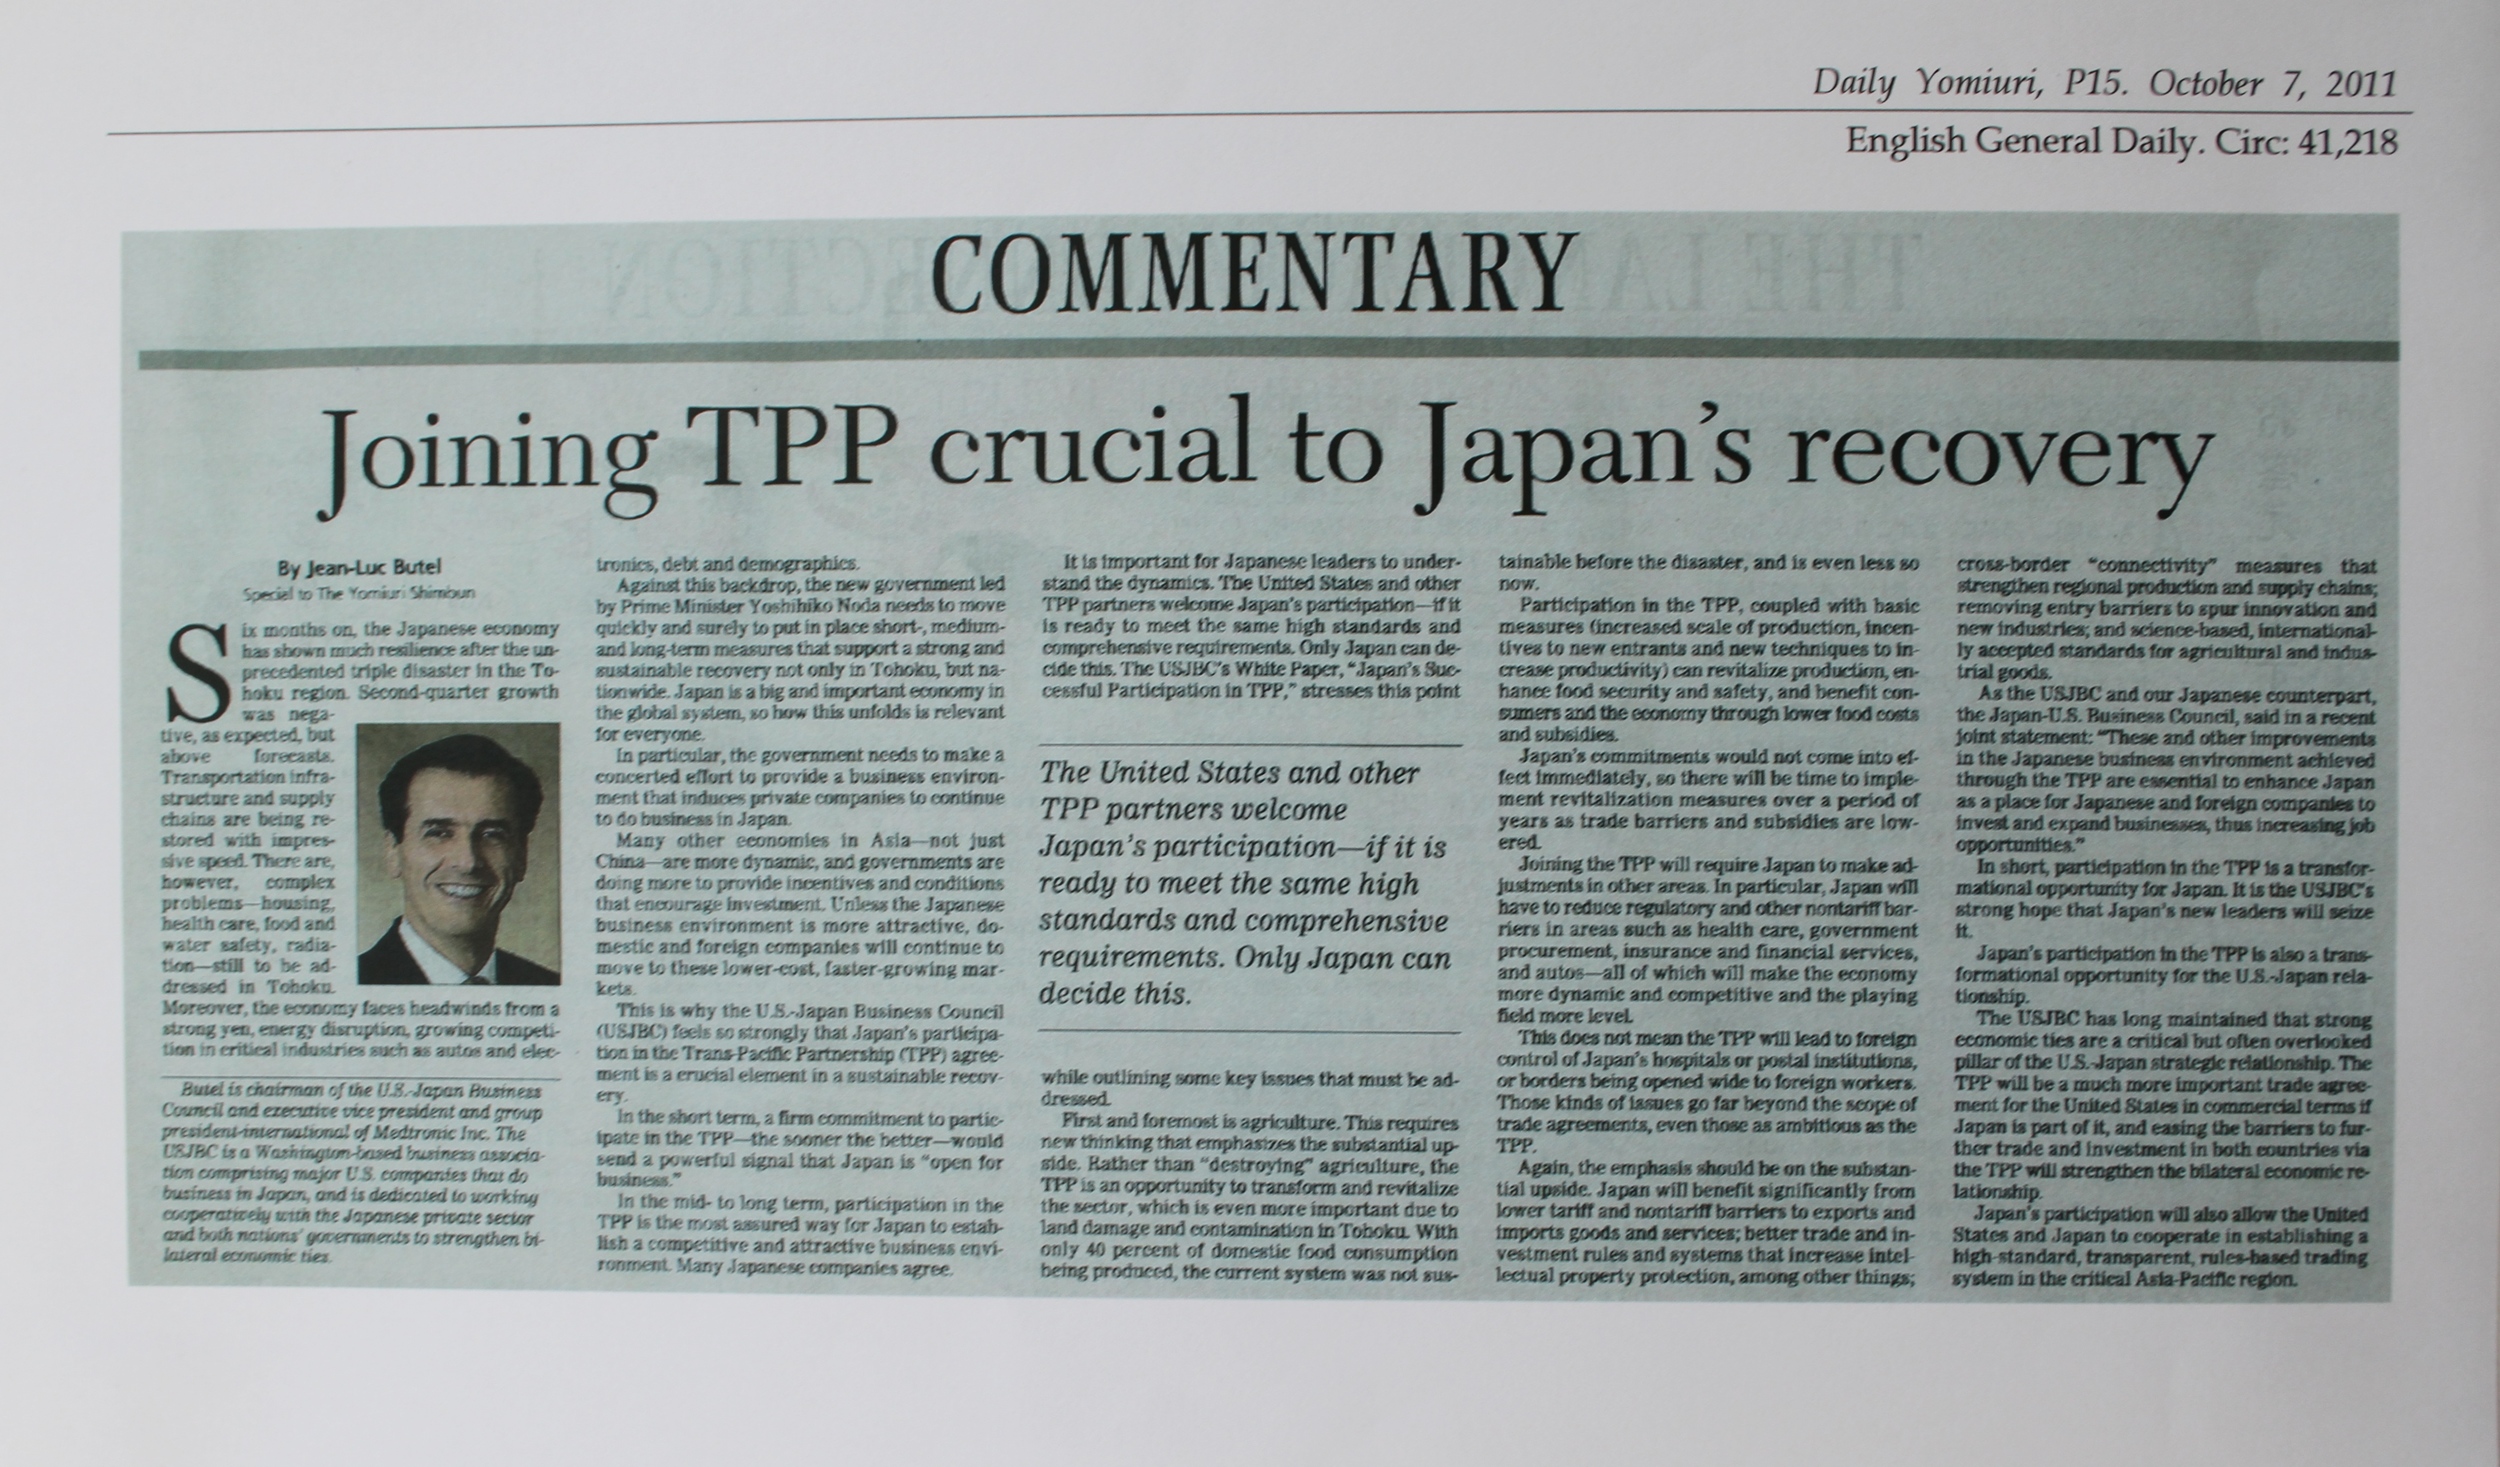 The Japan News by The Yomiuri Shimbun - Many companies in the IT